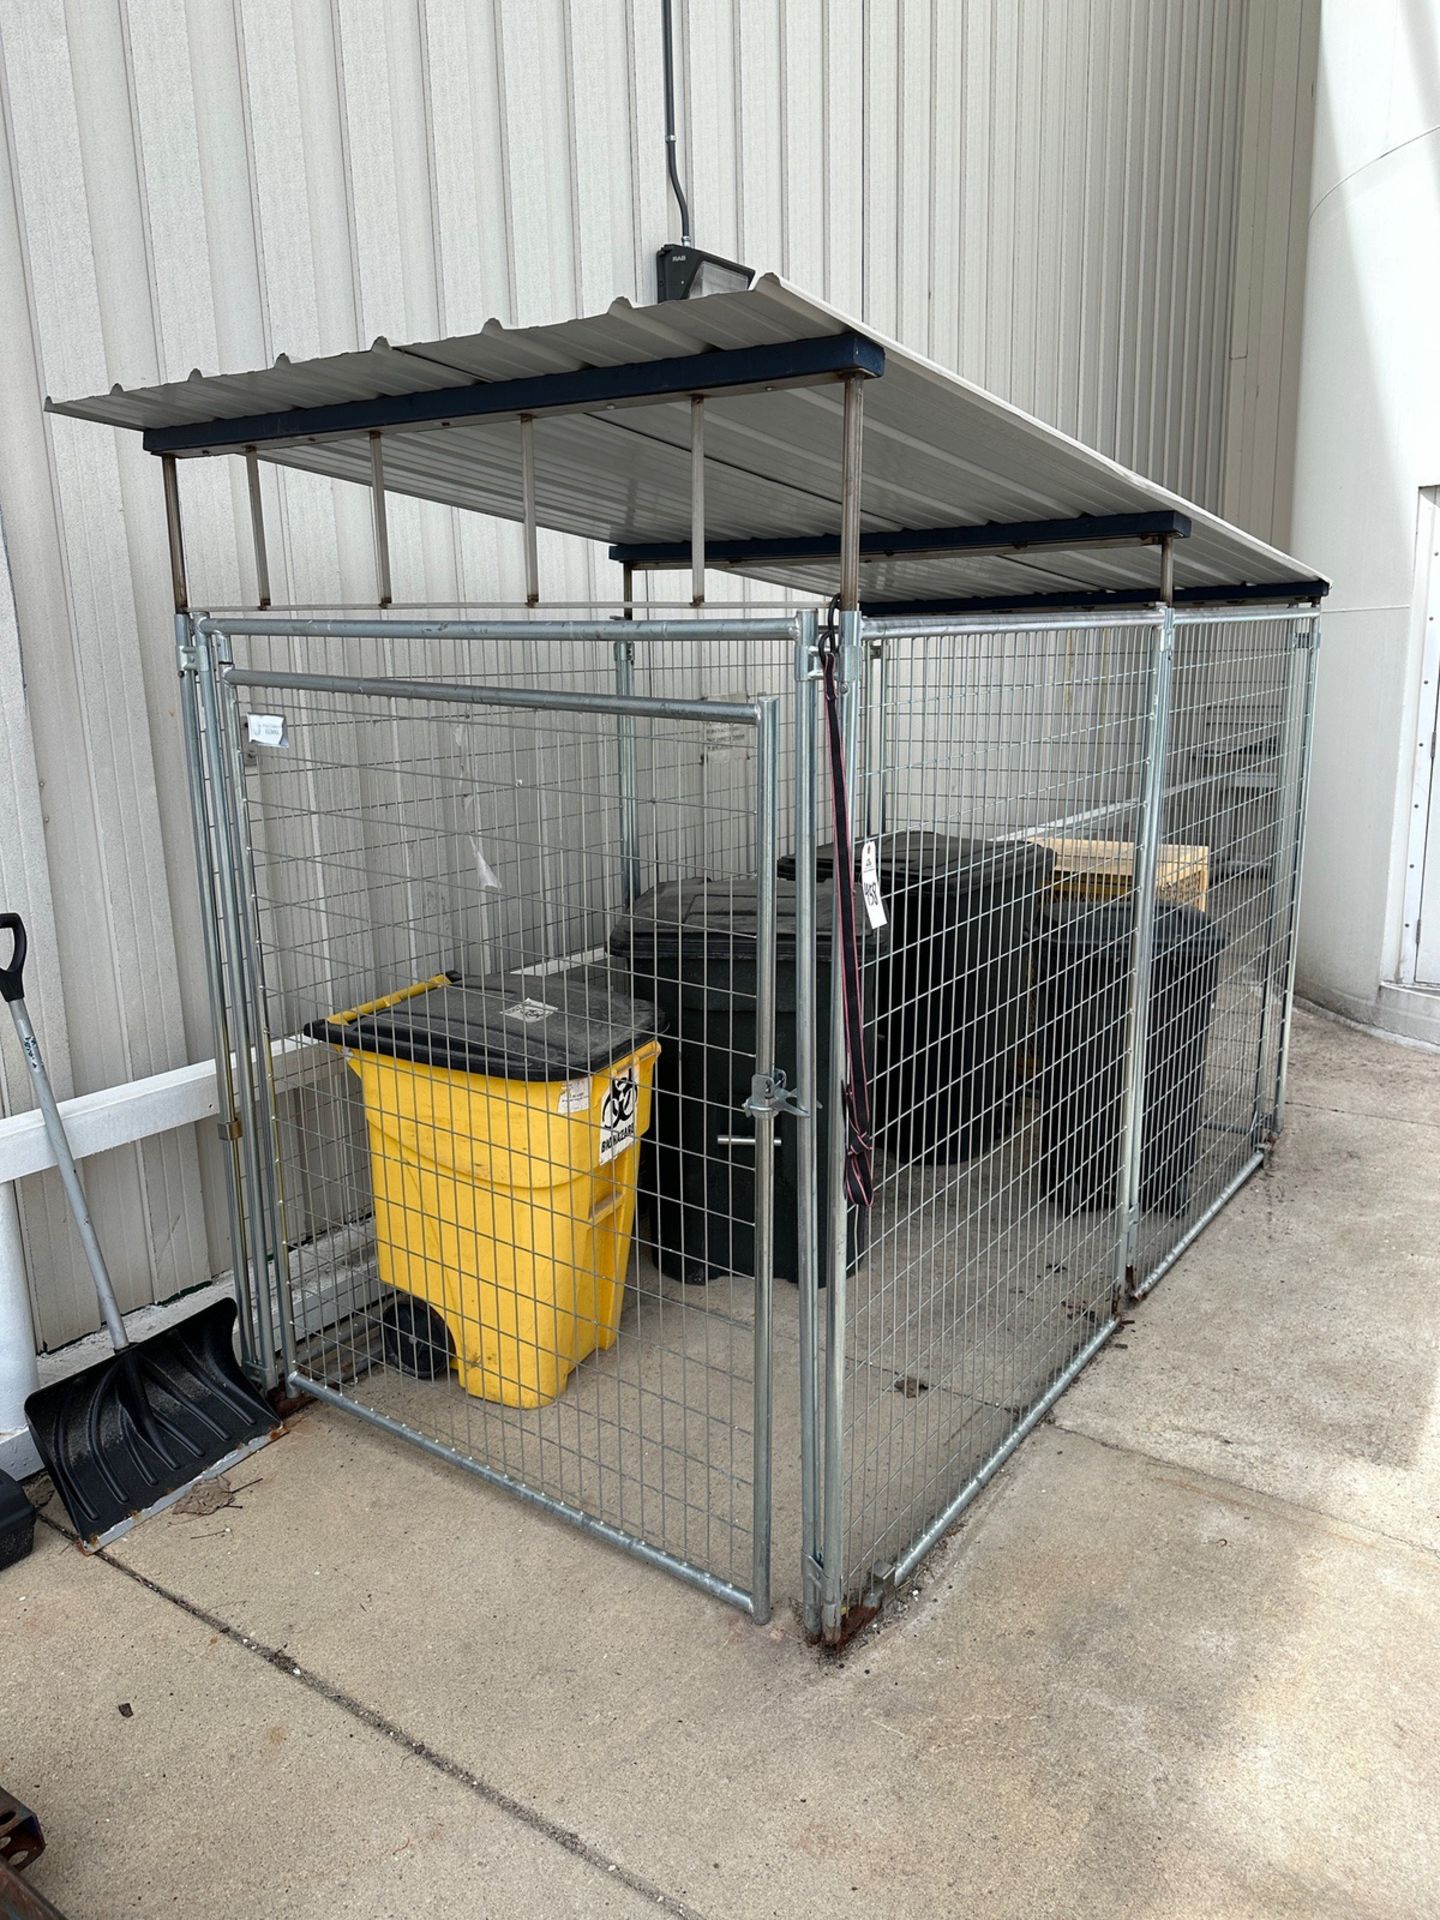 Kennel with Roof (Approx. 116" x 64") | Rig Fee $50